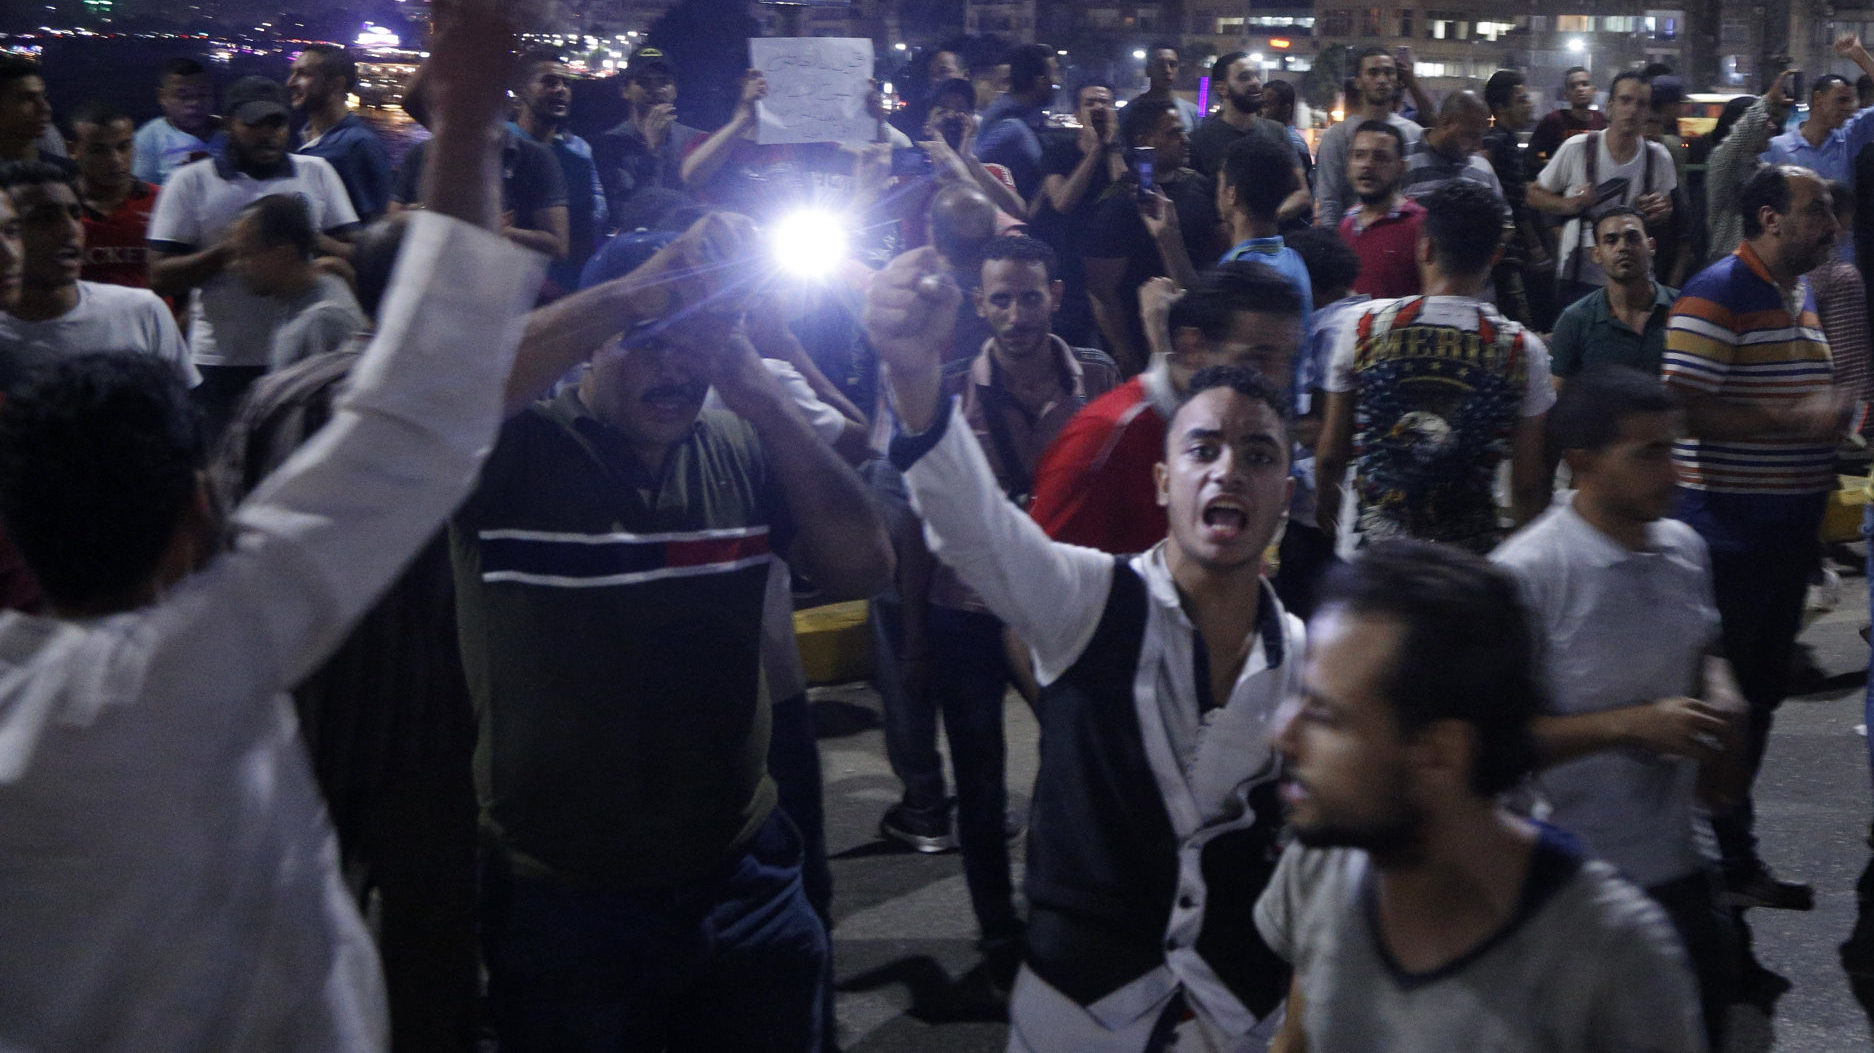 The People of Egypt are Fighting for Their Nation